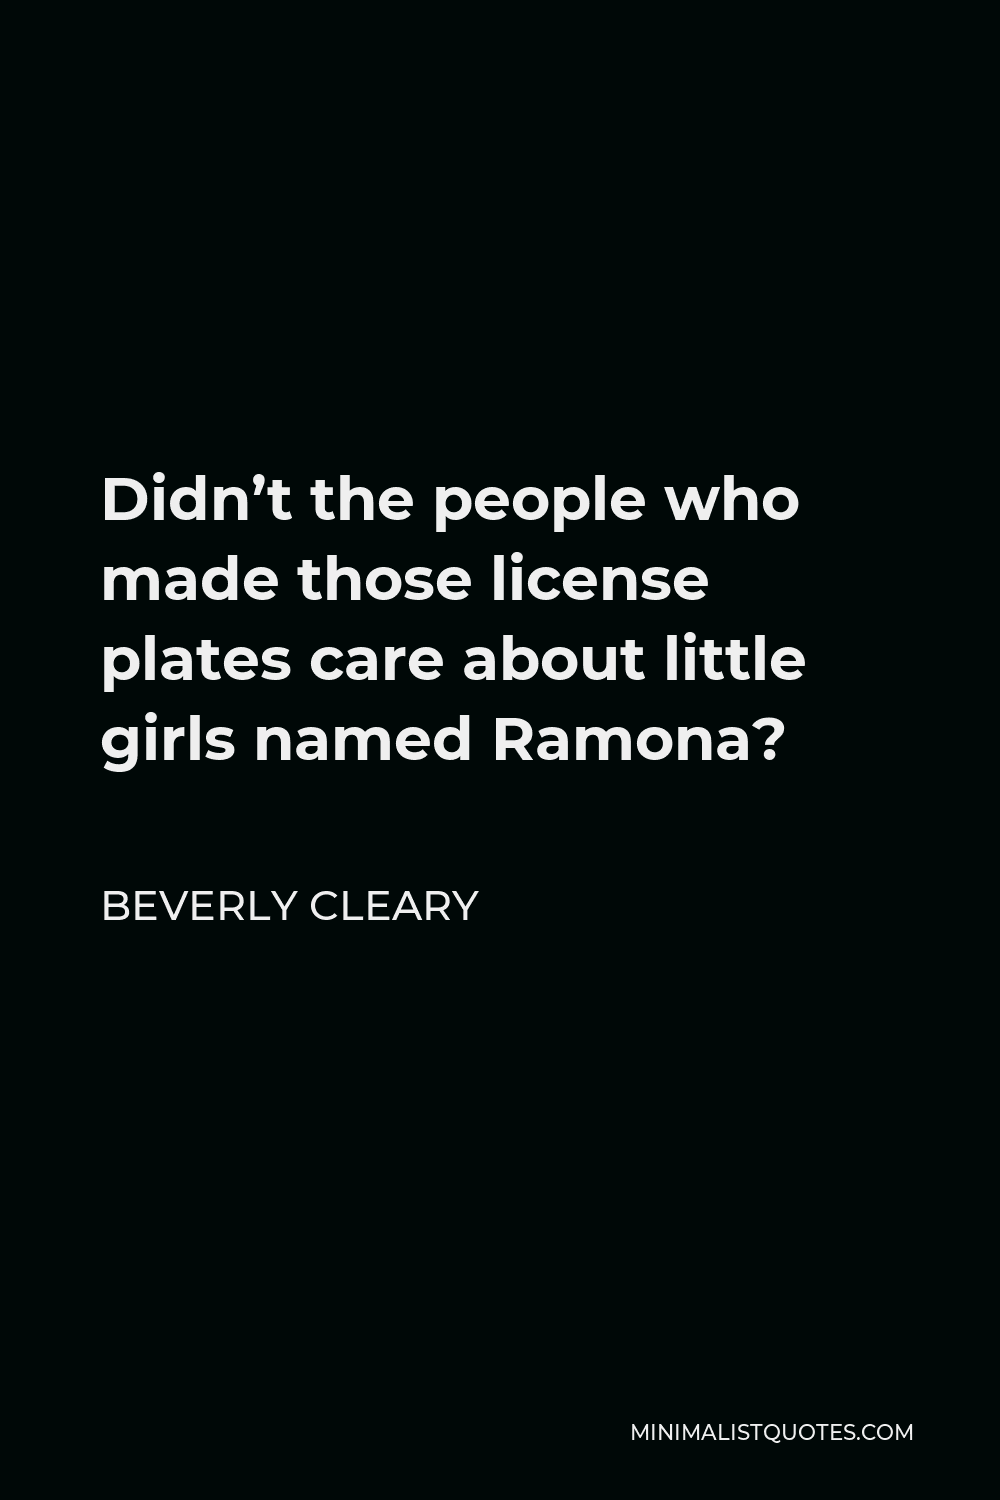 Beverly Cleary Quote - Didn’t the people who made those license plates care about little girls named Ramona?